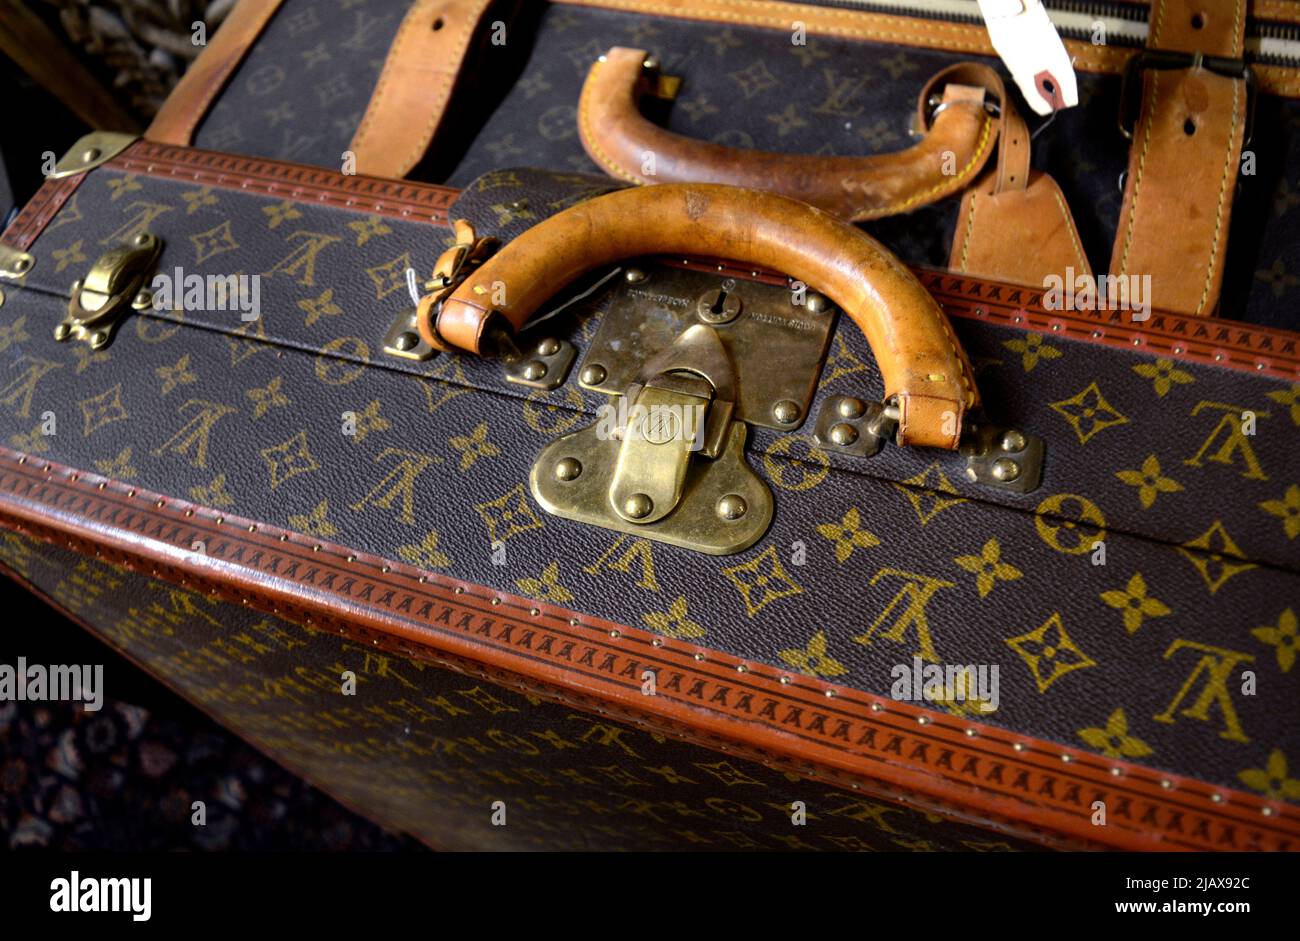 Fashionable Suitcases Bags Luxury Louis Vuitton Store Moscow 2018 – Stock  Editorial Photo © ozina #223588852